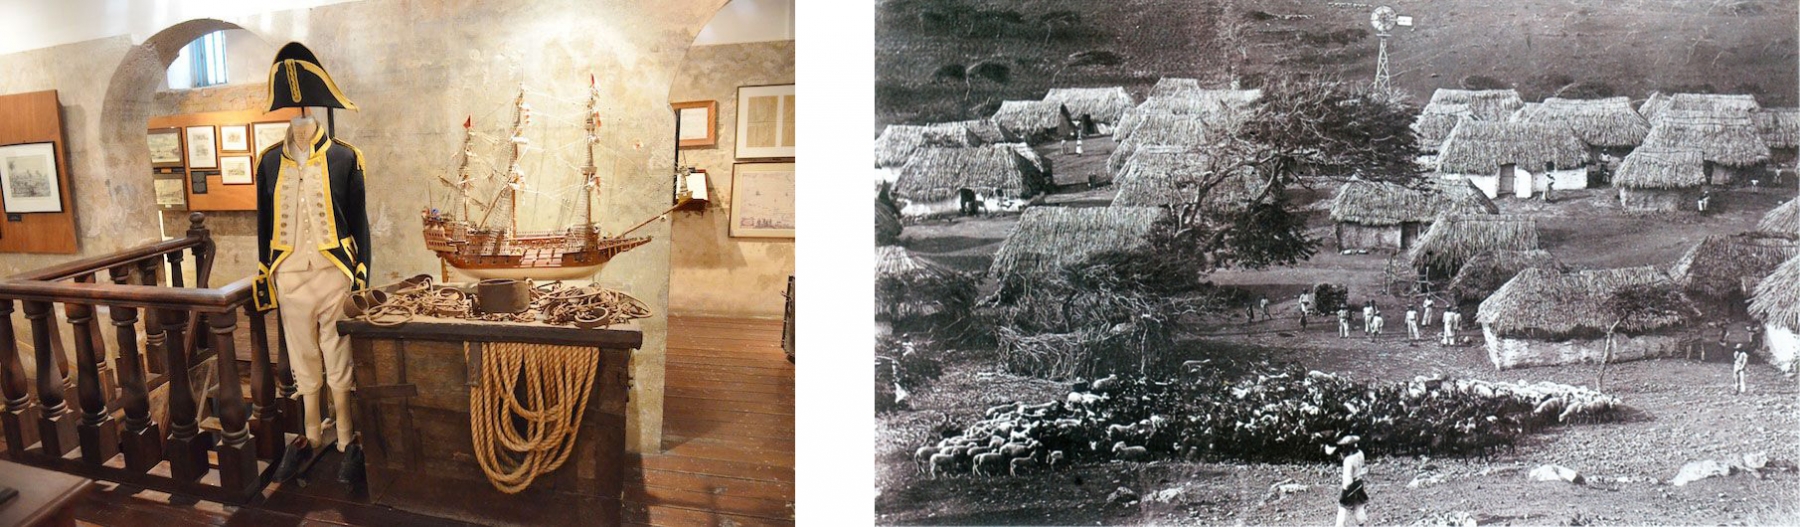 Left: photo by De Beijer, taken during his residency when he visited the Museum Kur&aacute; Hulanda, Cura&ccedil;ao.

Right: from the artist&#39;s research archive &mdash; a former plantation of Siberio Cafiero, Cura&ccedil;ao (1900-1904).

&nbsp;